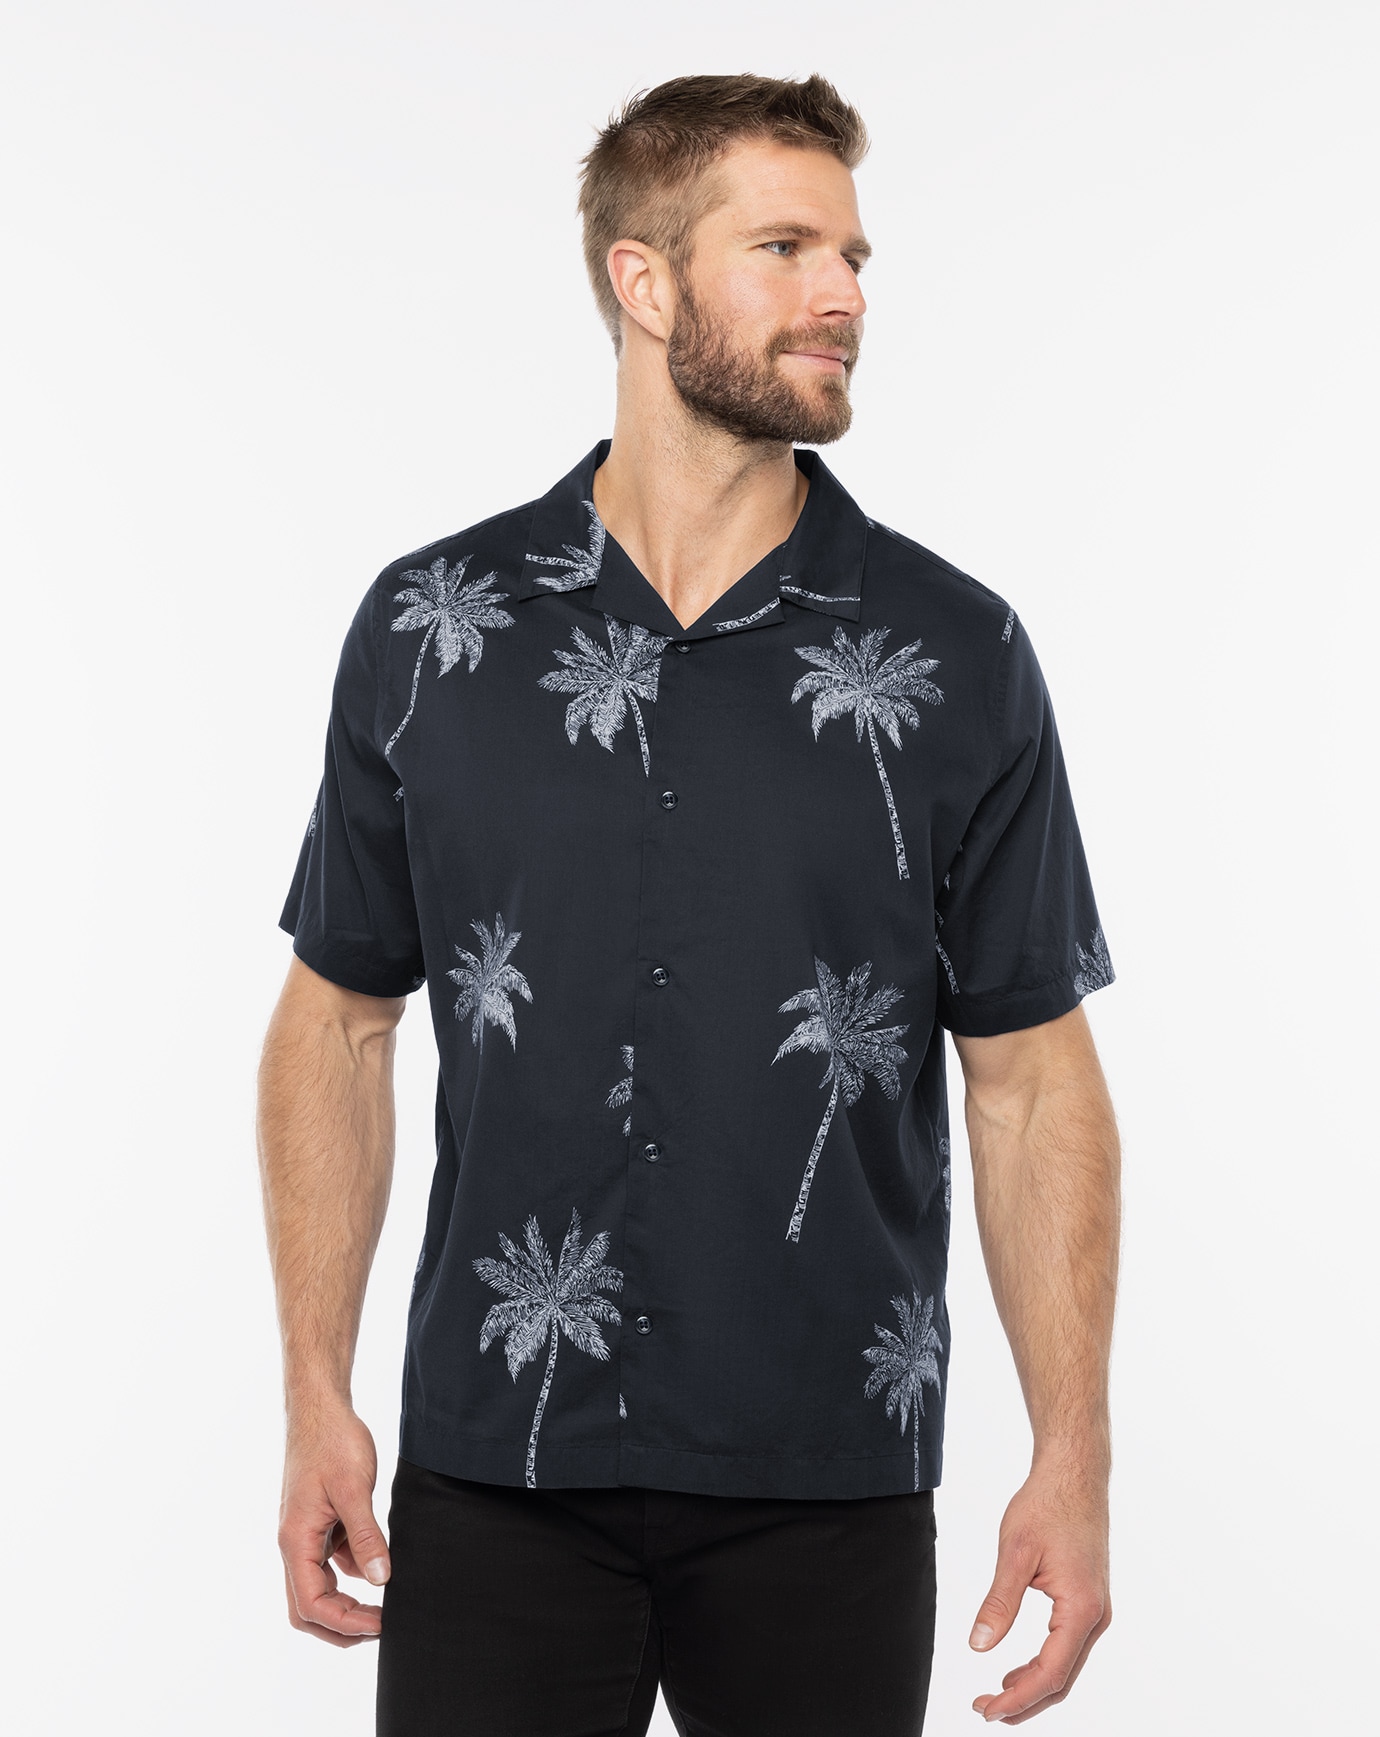 Related Product - COMEDY SHOW BUTTON-UP